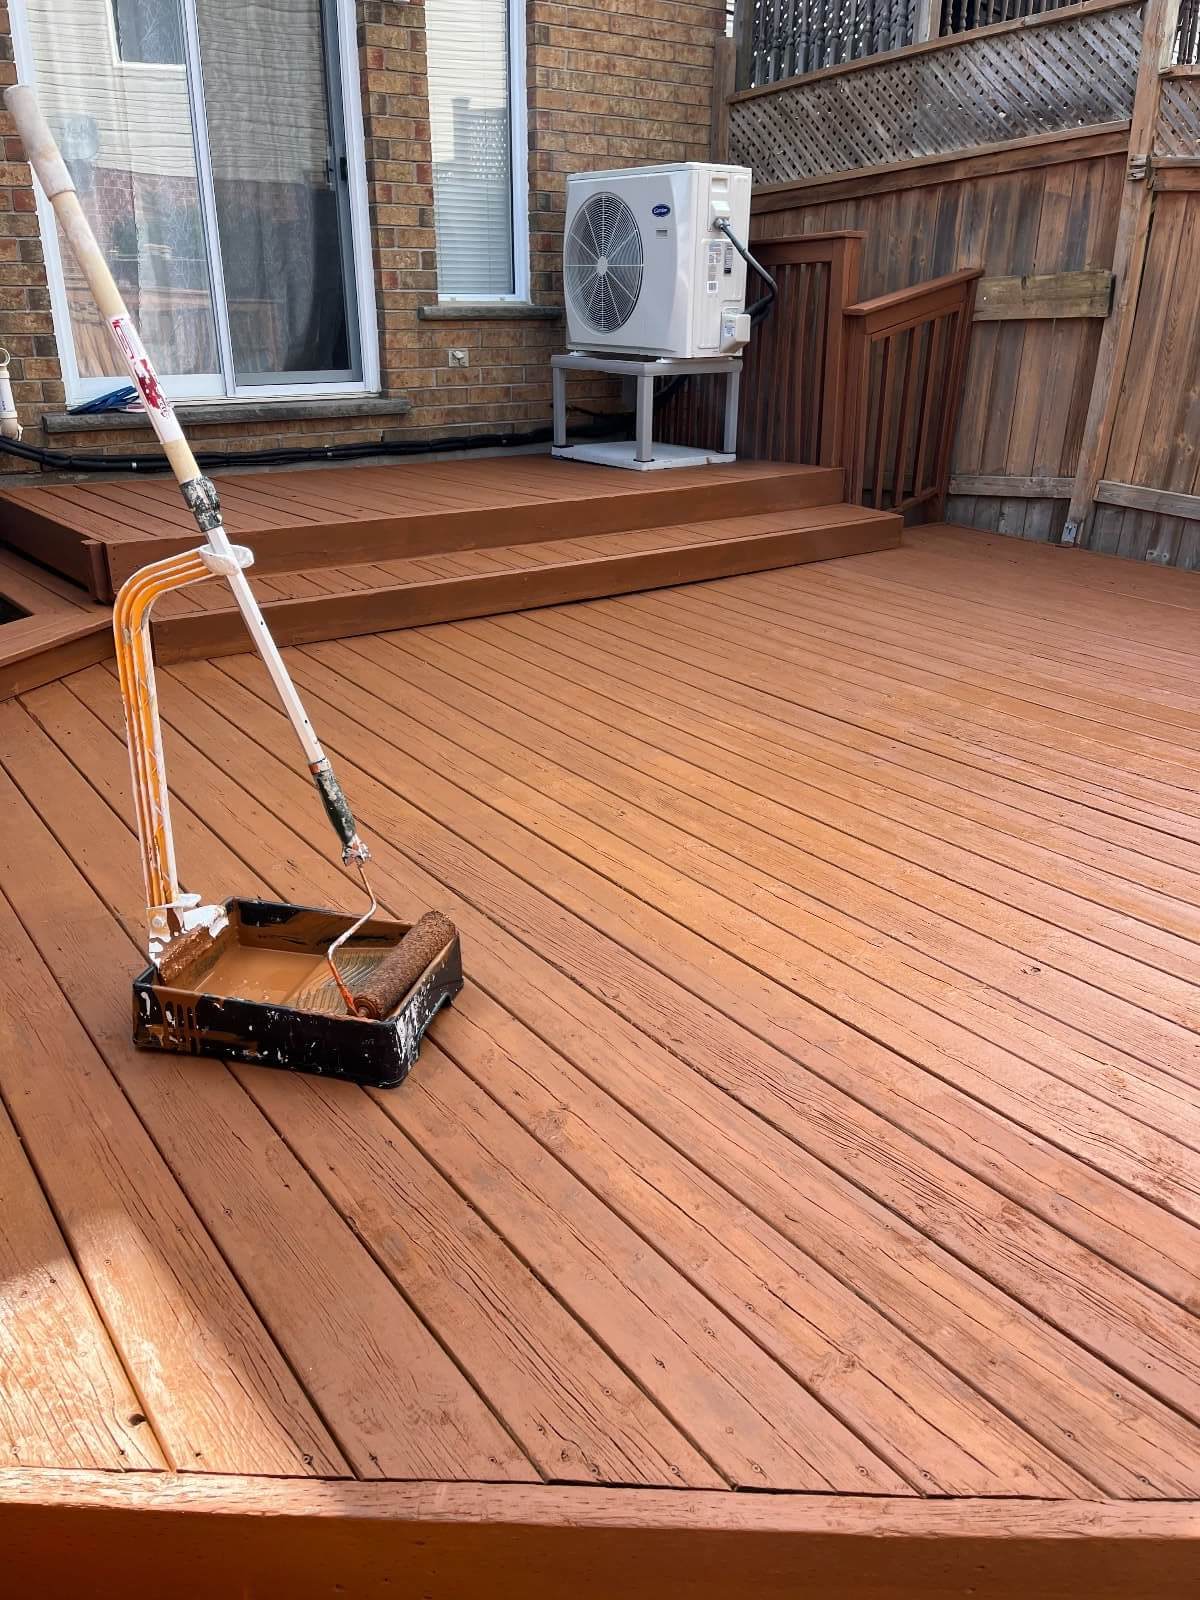 Freshly stained deck with a paint brush roller, and tray in view, illustrating Fit Painting's thorough deck staining & painting services in Kitchener-Waterloo.